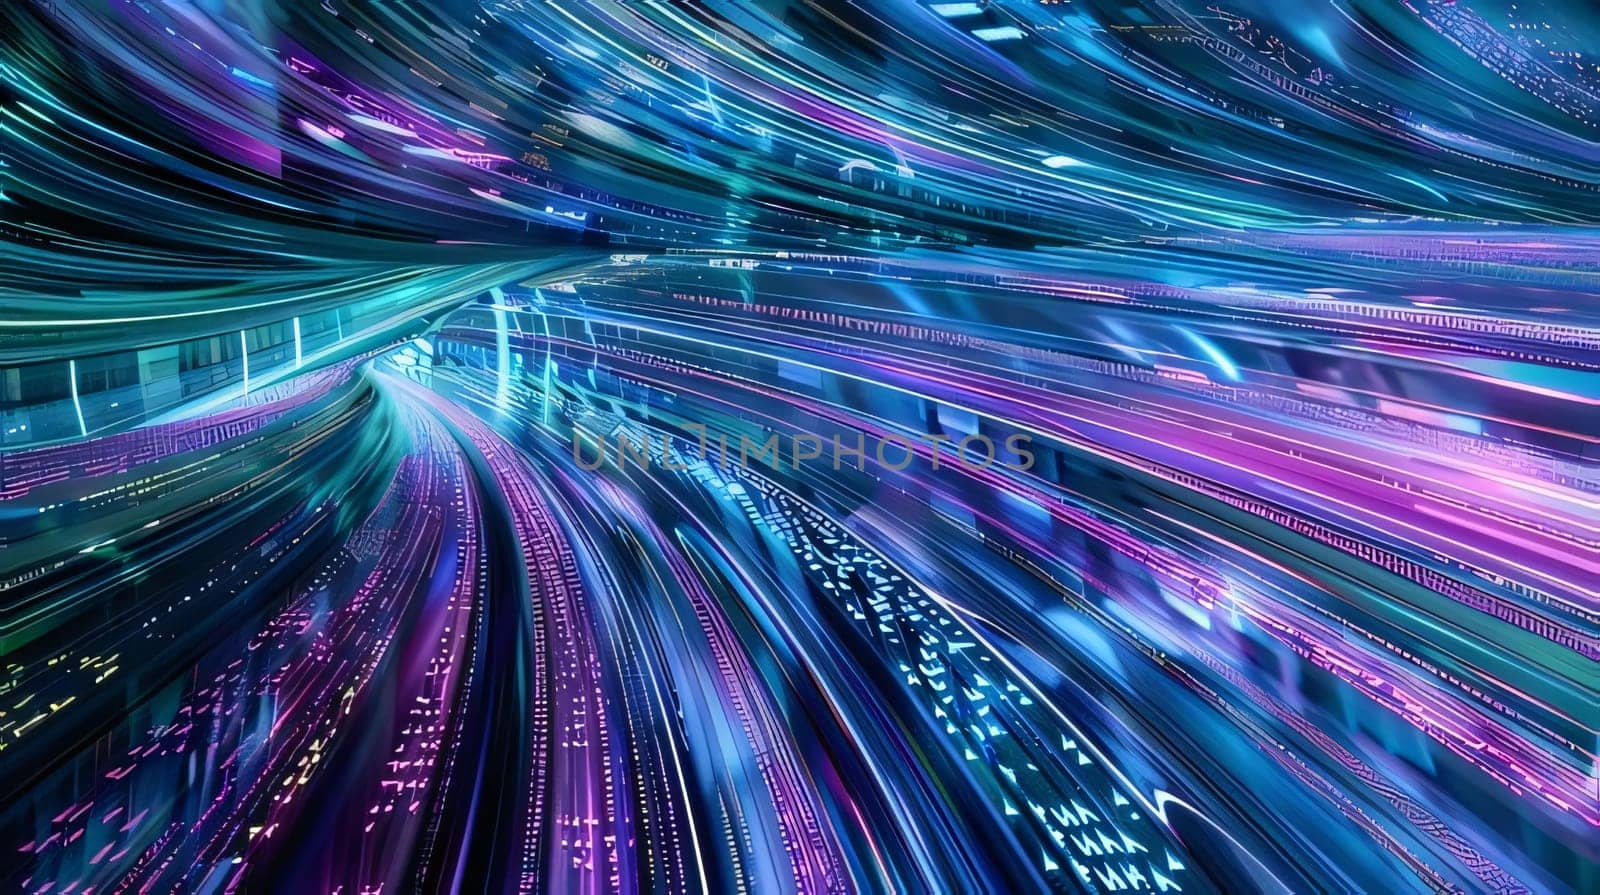 Abstract background design: Futuristic technology background with glowing lines and bokeh effect